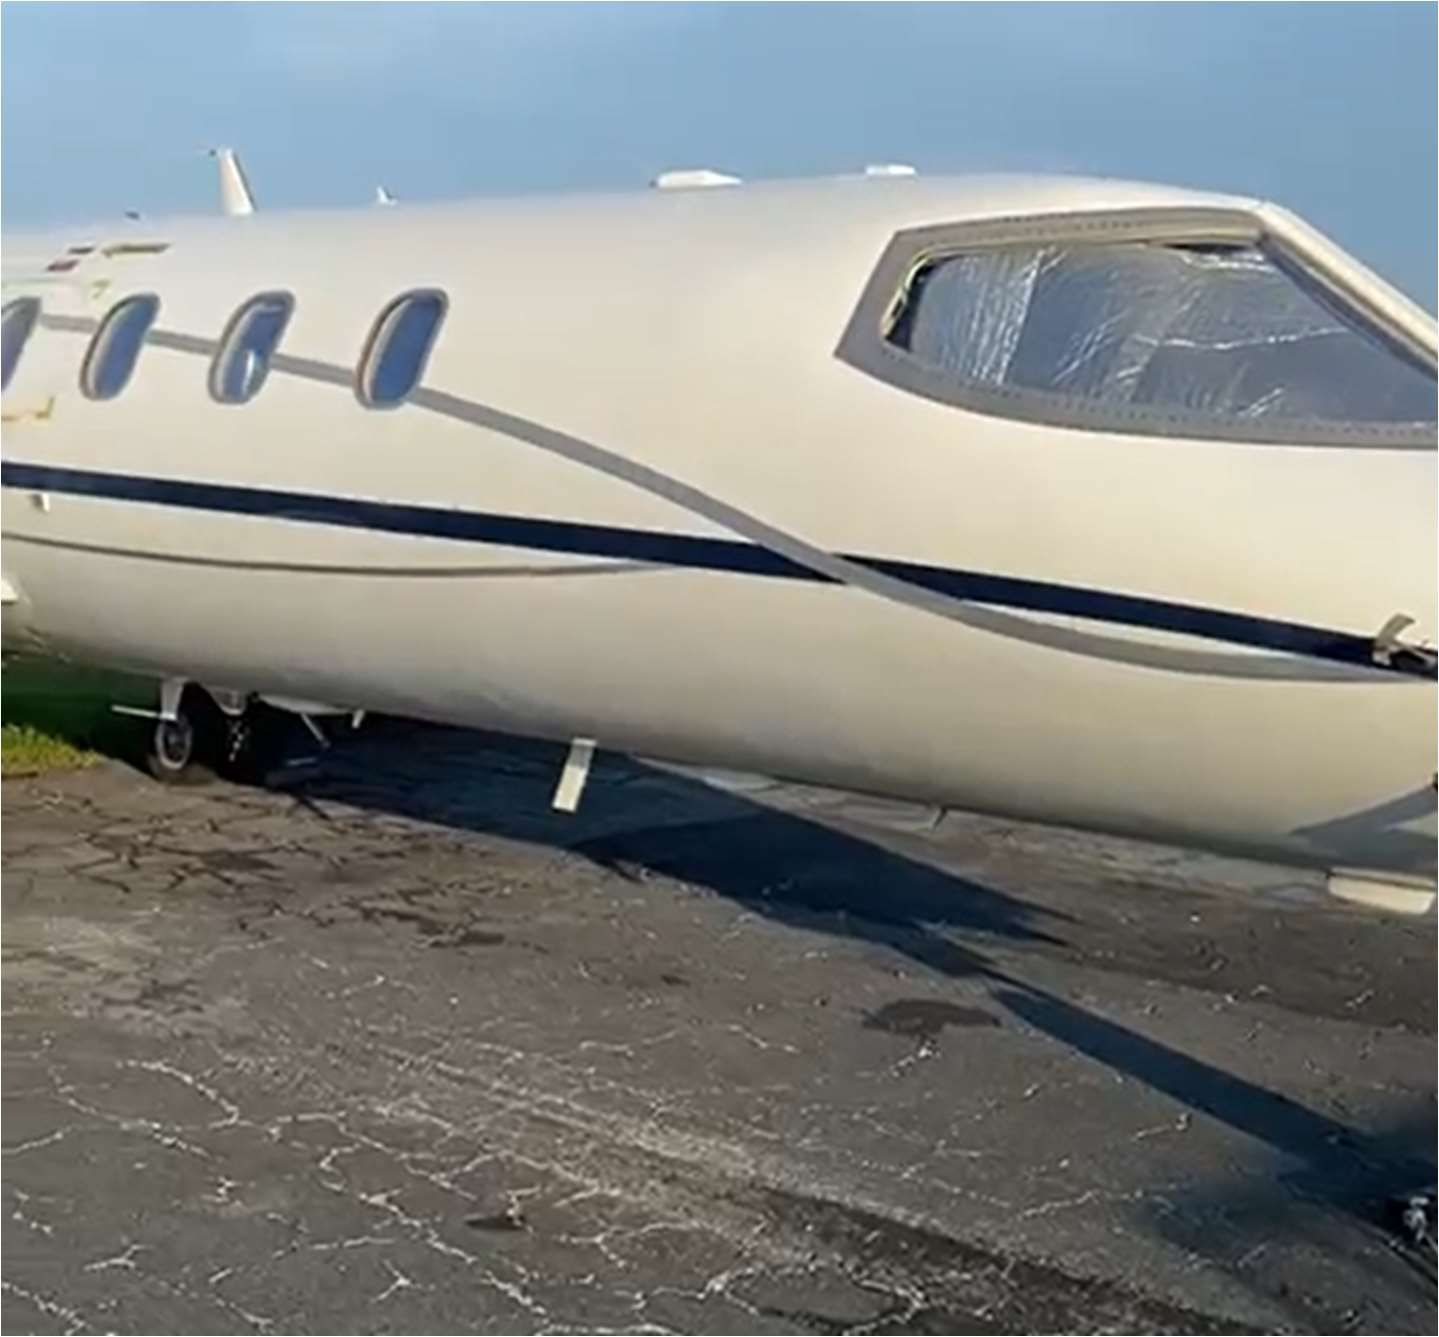 1985 Learjet 35A - Exterior